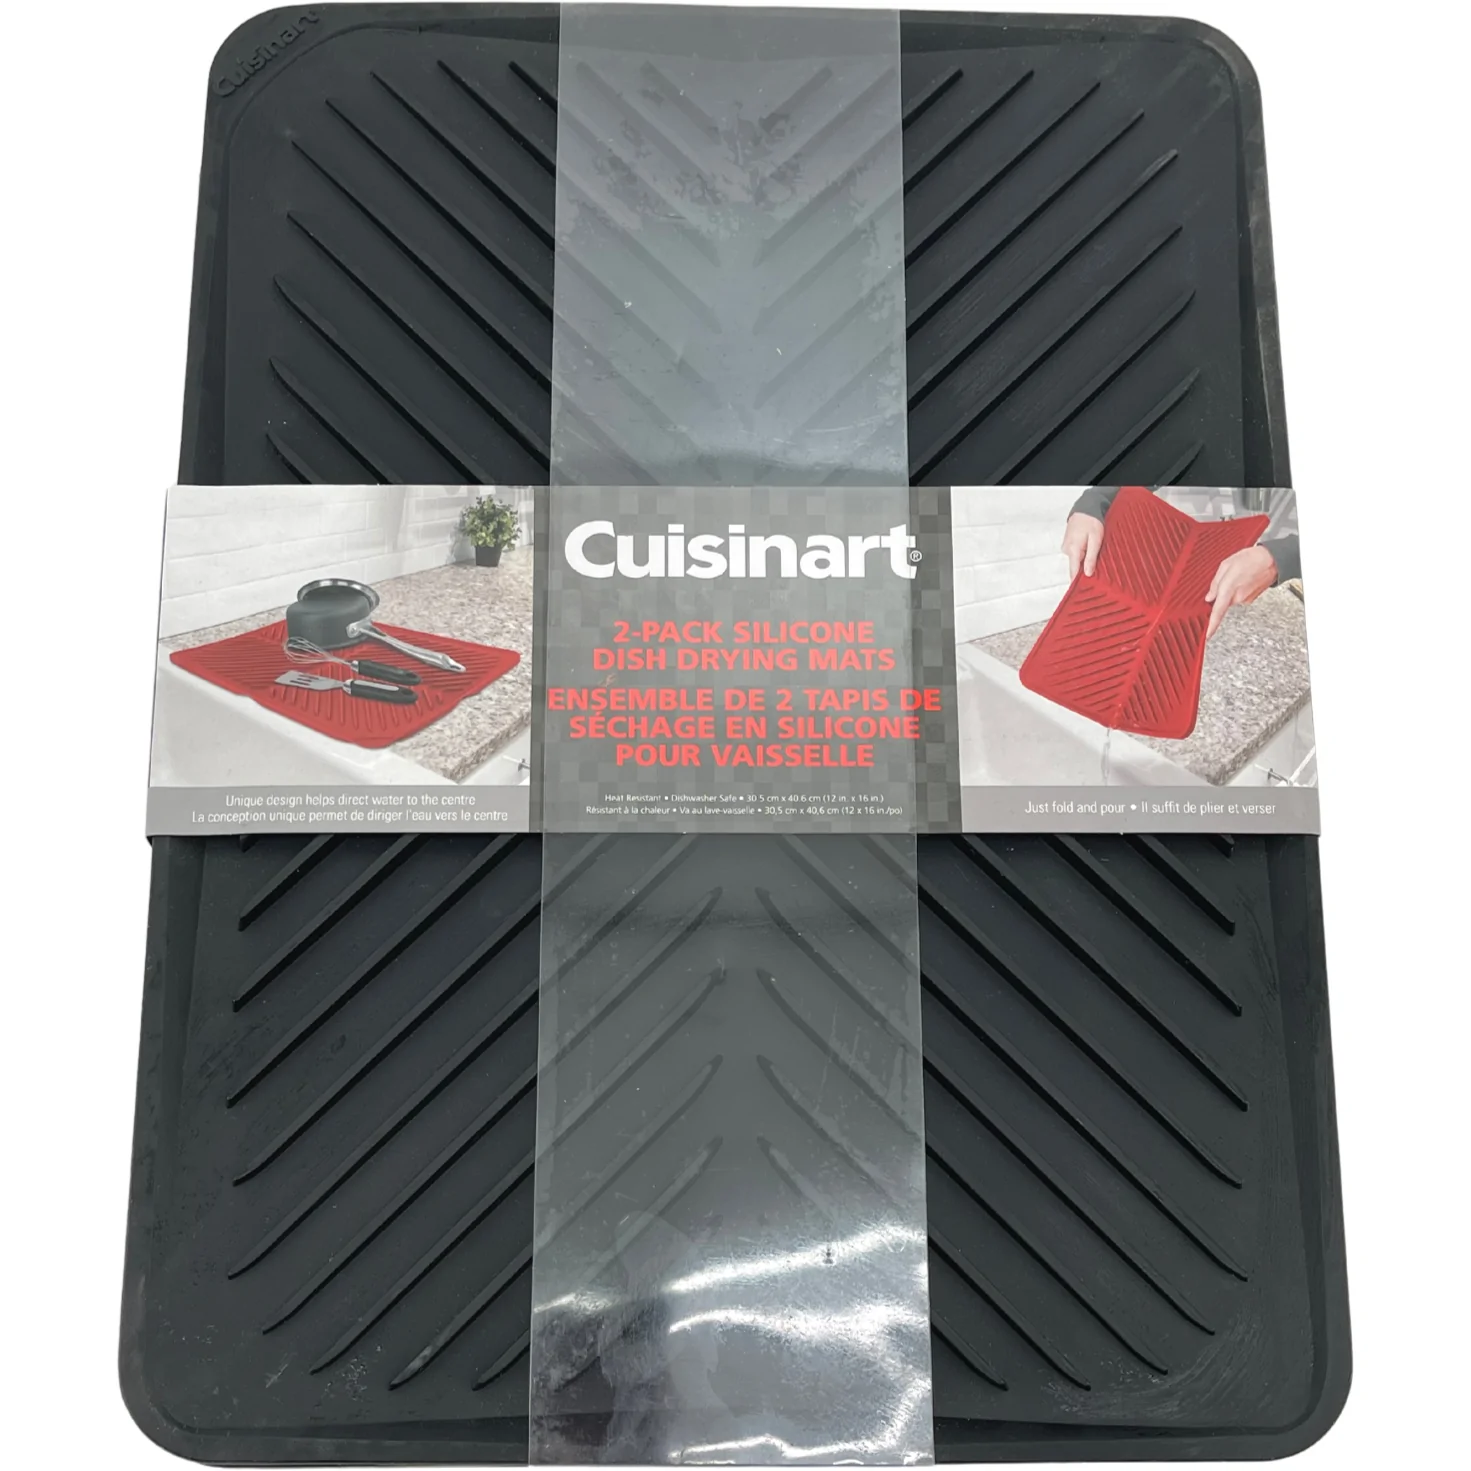 Cuisinart 2 Pack of Silicone Dish Drying Mats – CanadaWide